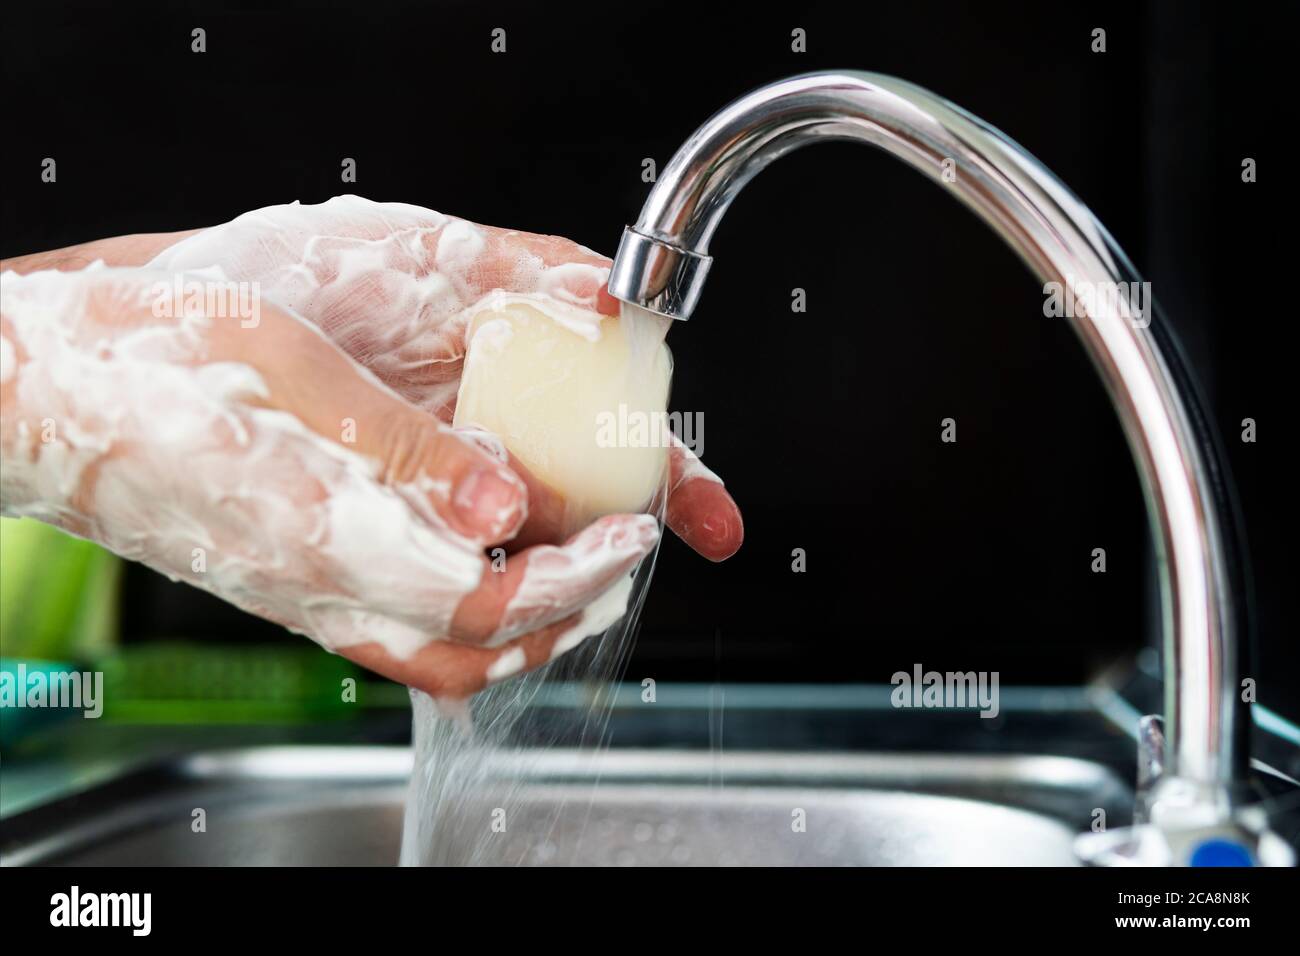 Washing hands rubbing with soap man for winter flu virus prevention, hygiene to stop spreading germs. man washes his hands with soap on black Stock Photo